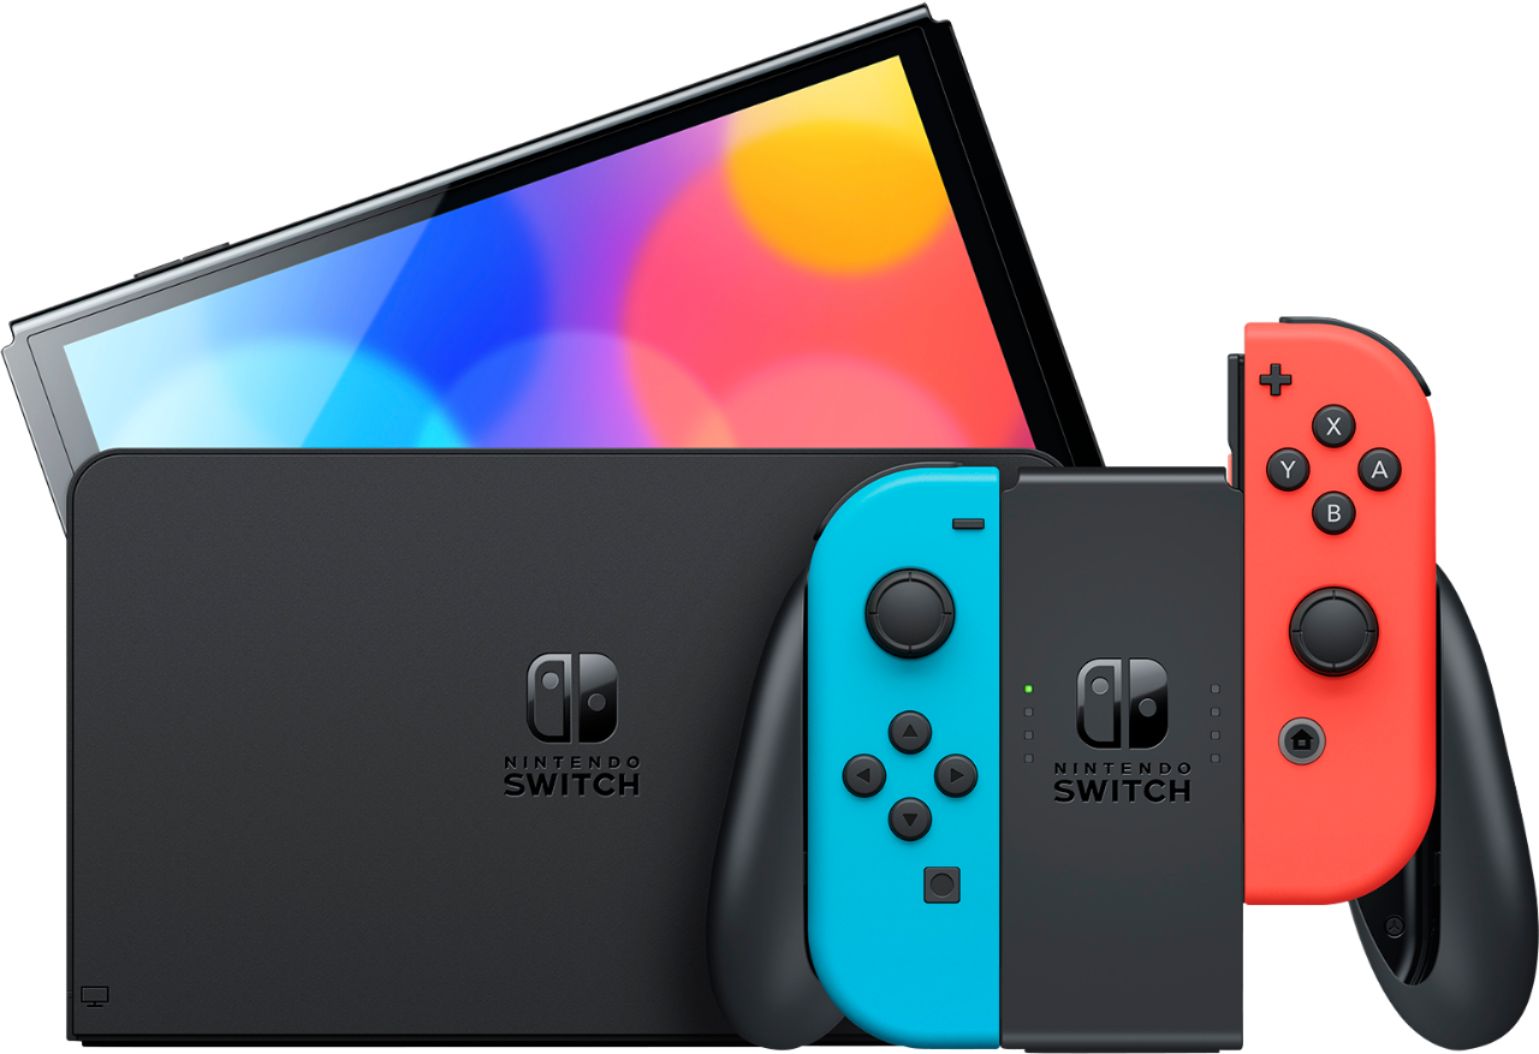 2021 New Nintendo Switch OLED Model Neon Red & Blue Joy Con 64GB Console HD Screen & LAN-Port Dock Super Mario Top 4 Selections Bundle with Mytrix Accessories - Best Holiday Gift